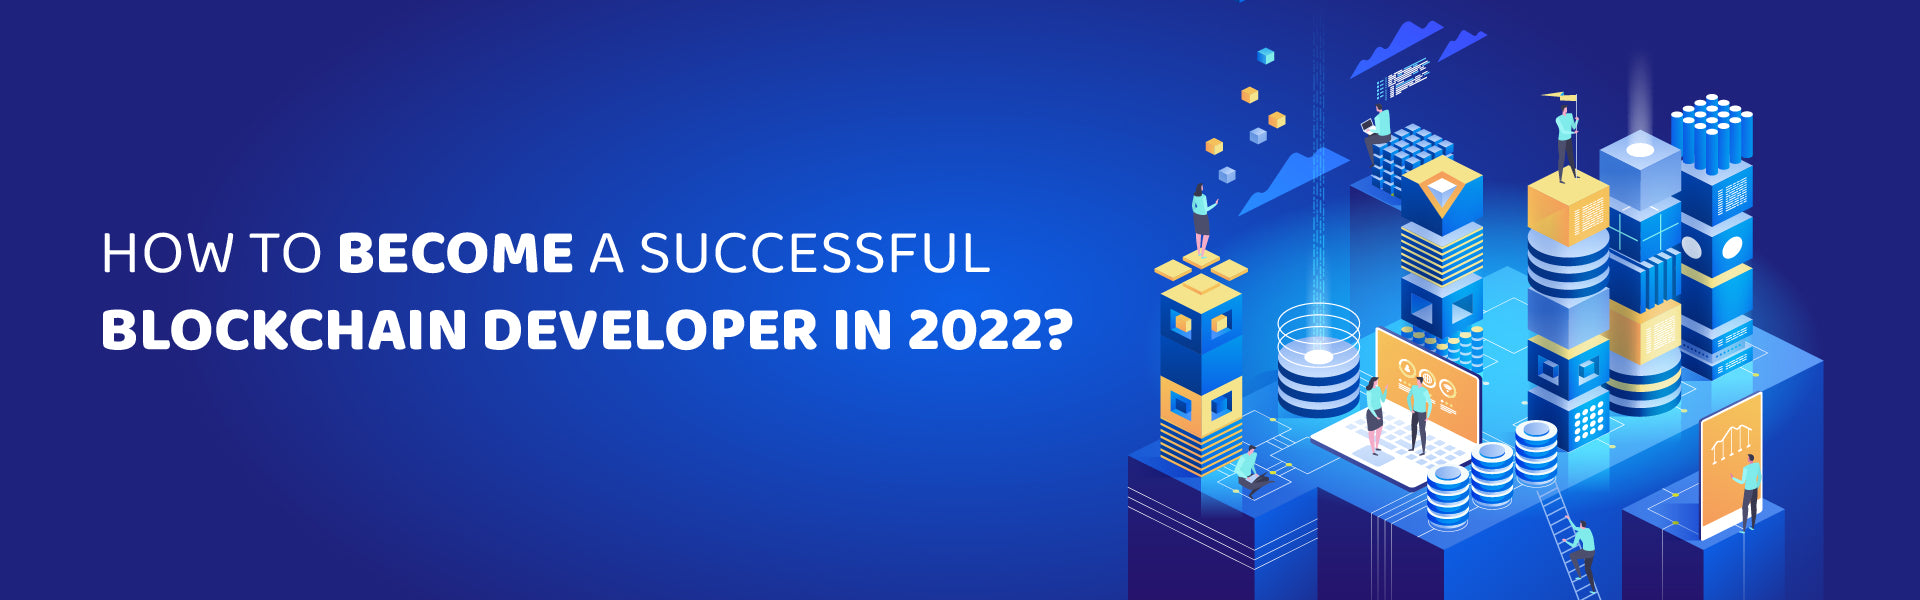 How to become a successful blockchain developer in 2022?